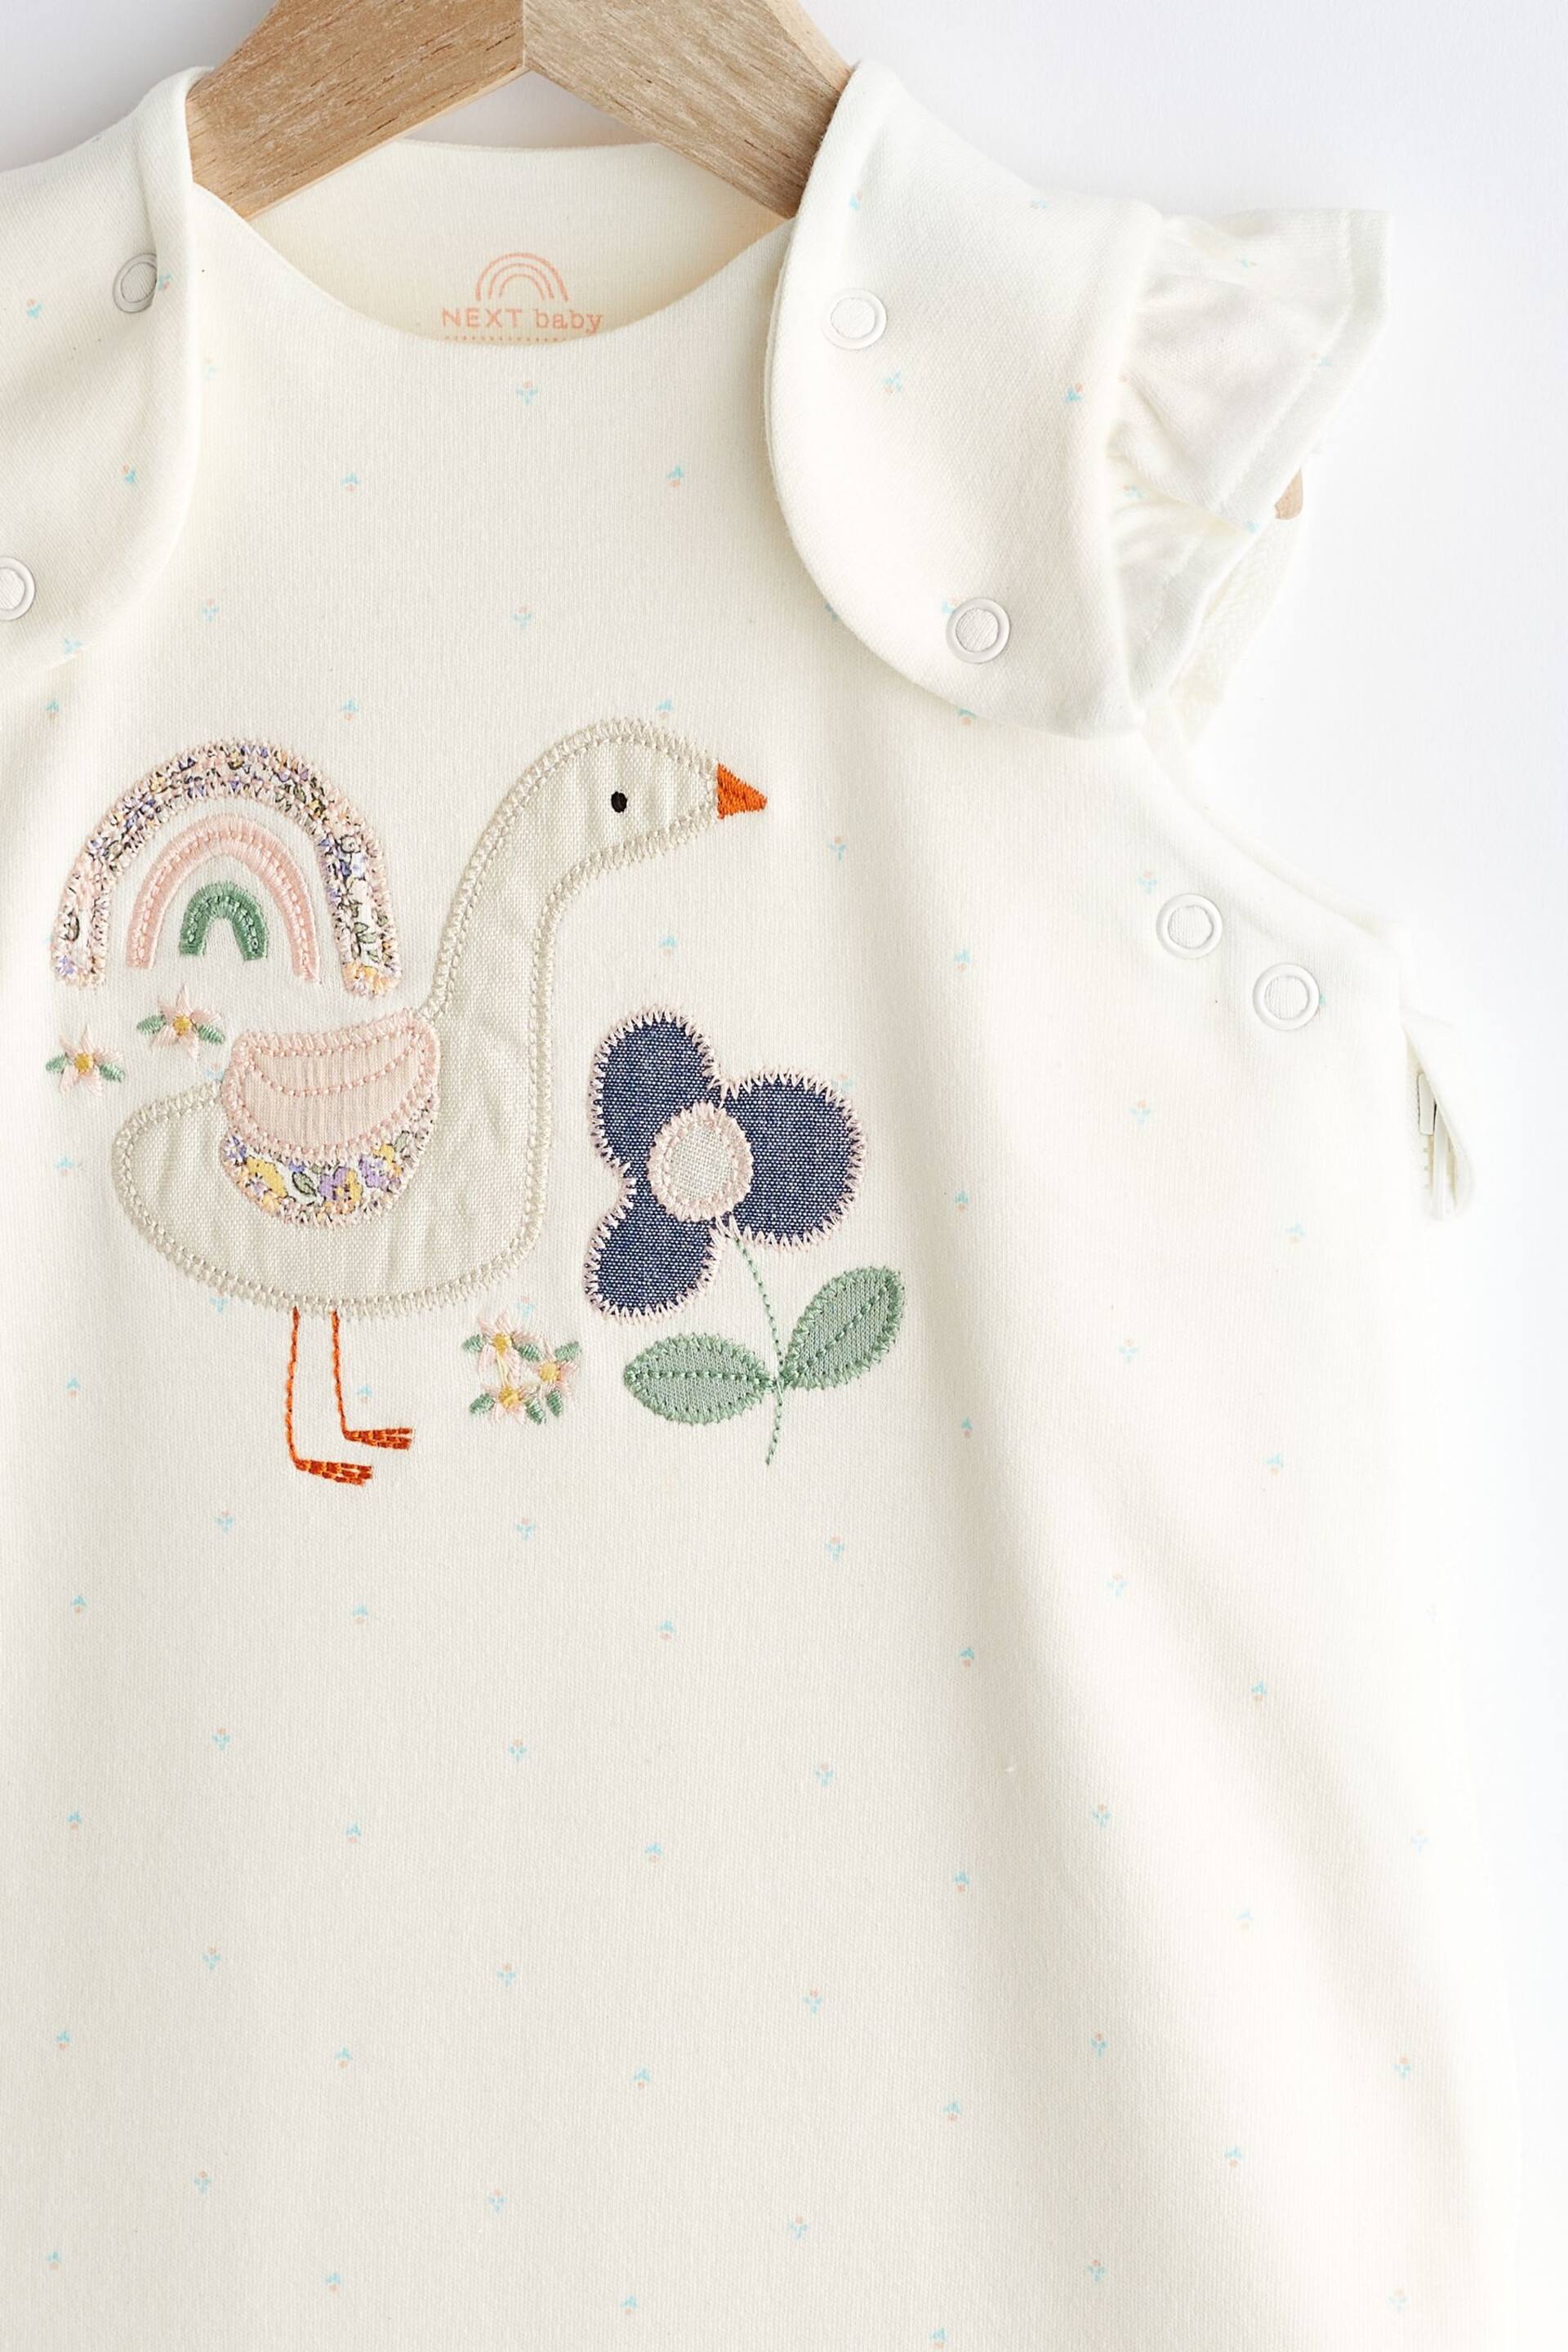 White Duck Applique 1 Tog  Baby 100% Cotton Sleep Bag - Image 8 of 11